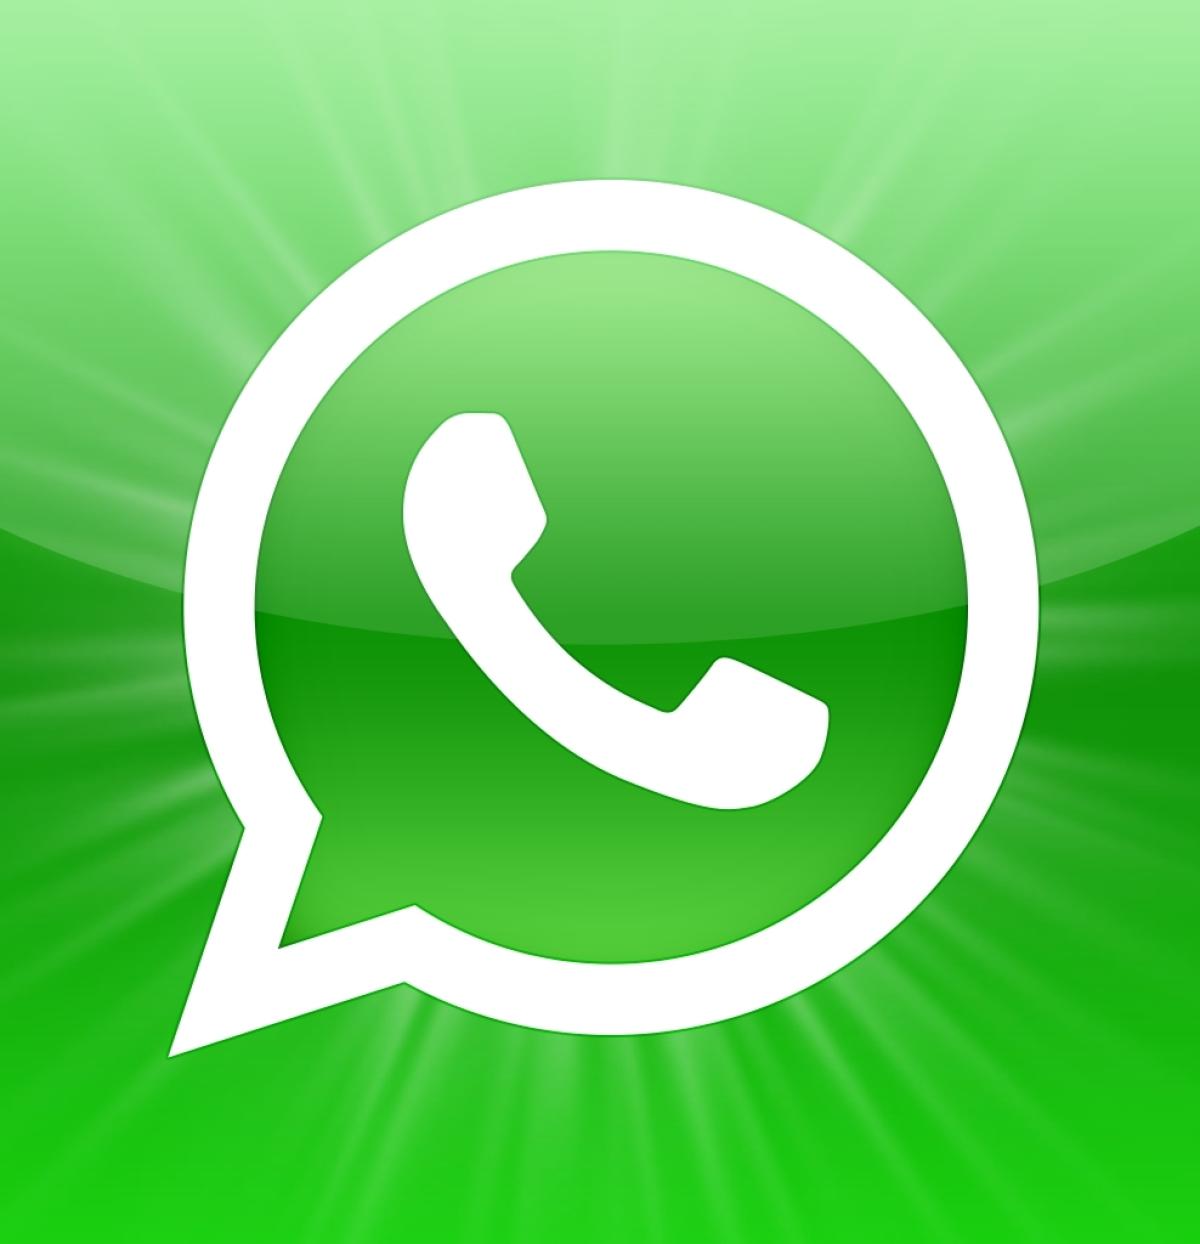 whatsapp free download and install